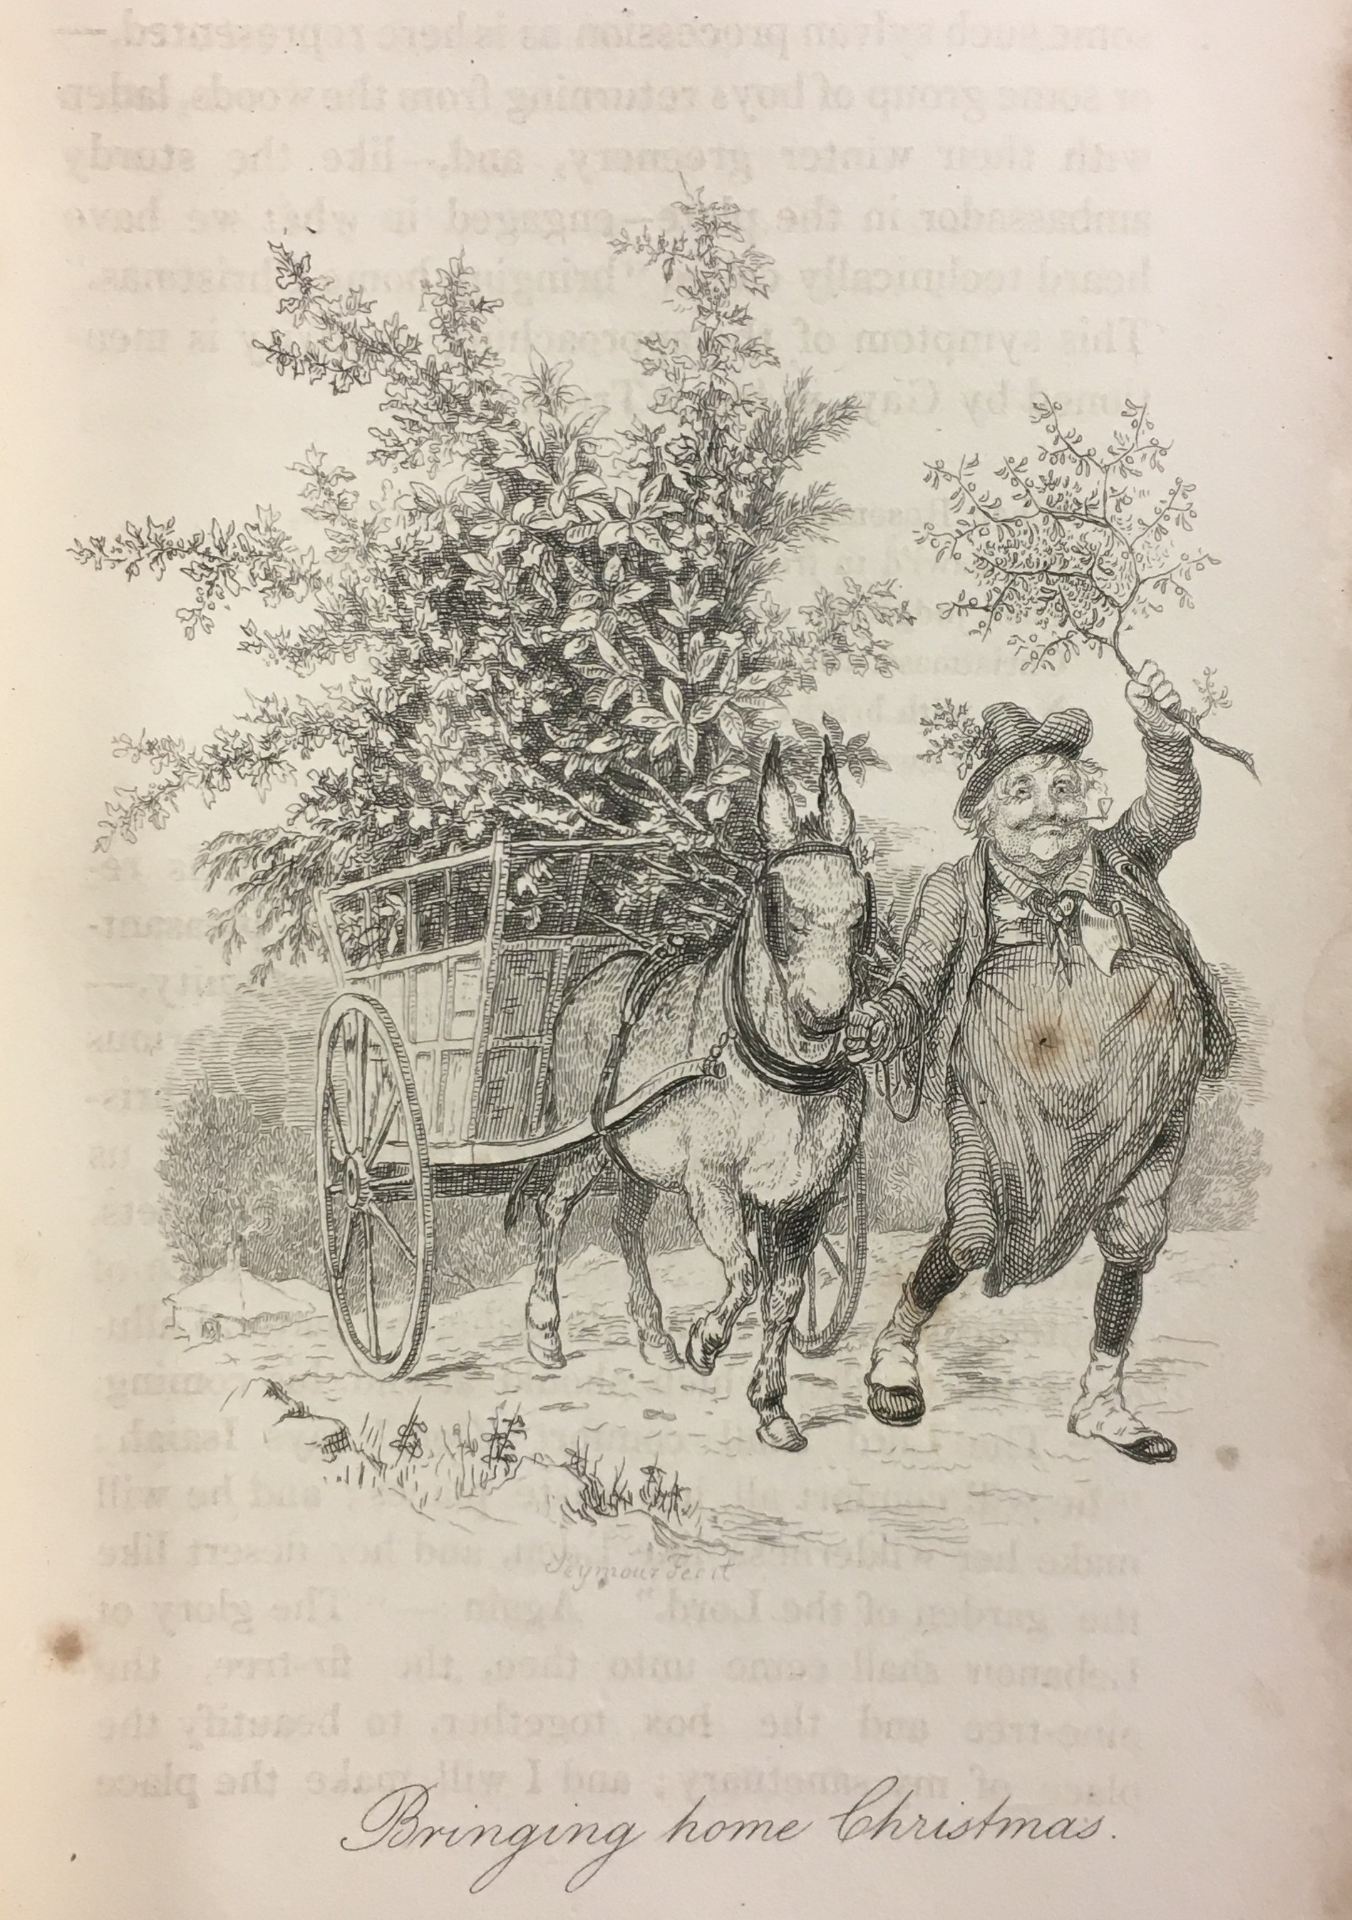 ‘Bringing home Christmas’. An illustration by Robert Seymour from ‘The Book of Christmas’ by Thomas Hervey (1836).